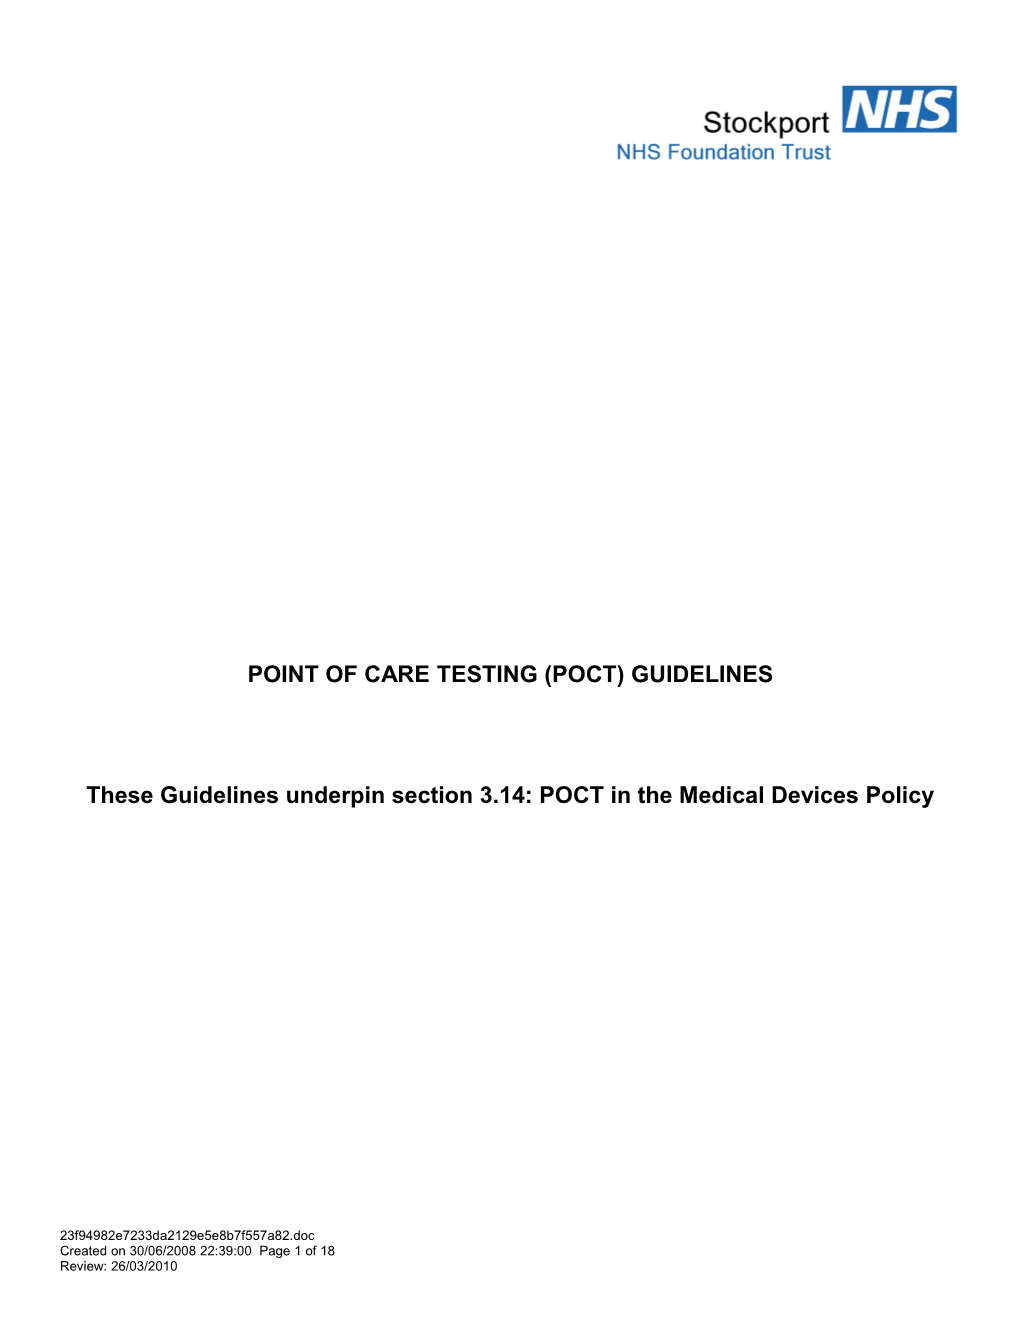 Point of Care Testing (Poct) Procedure